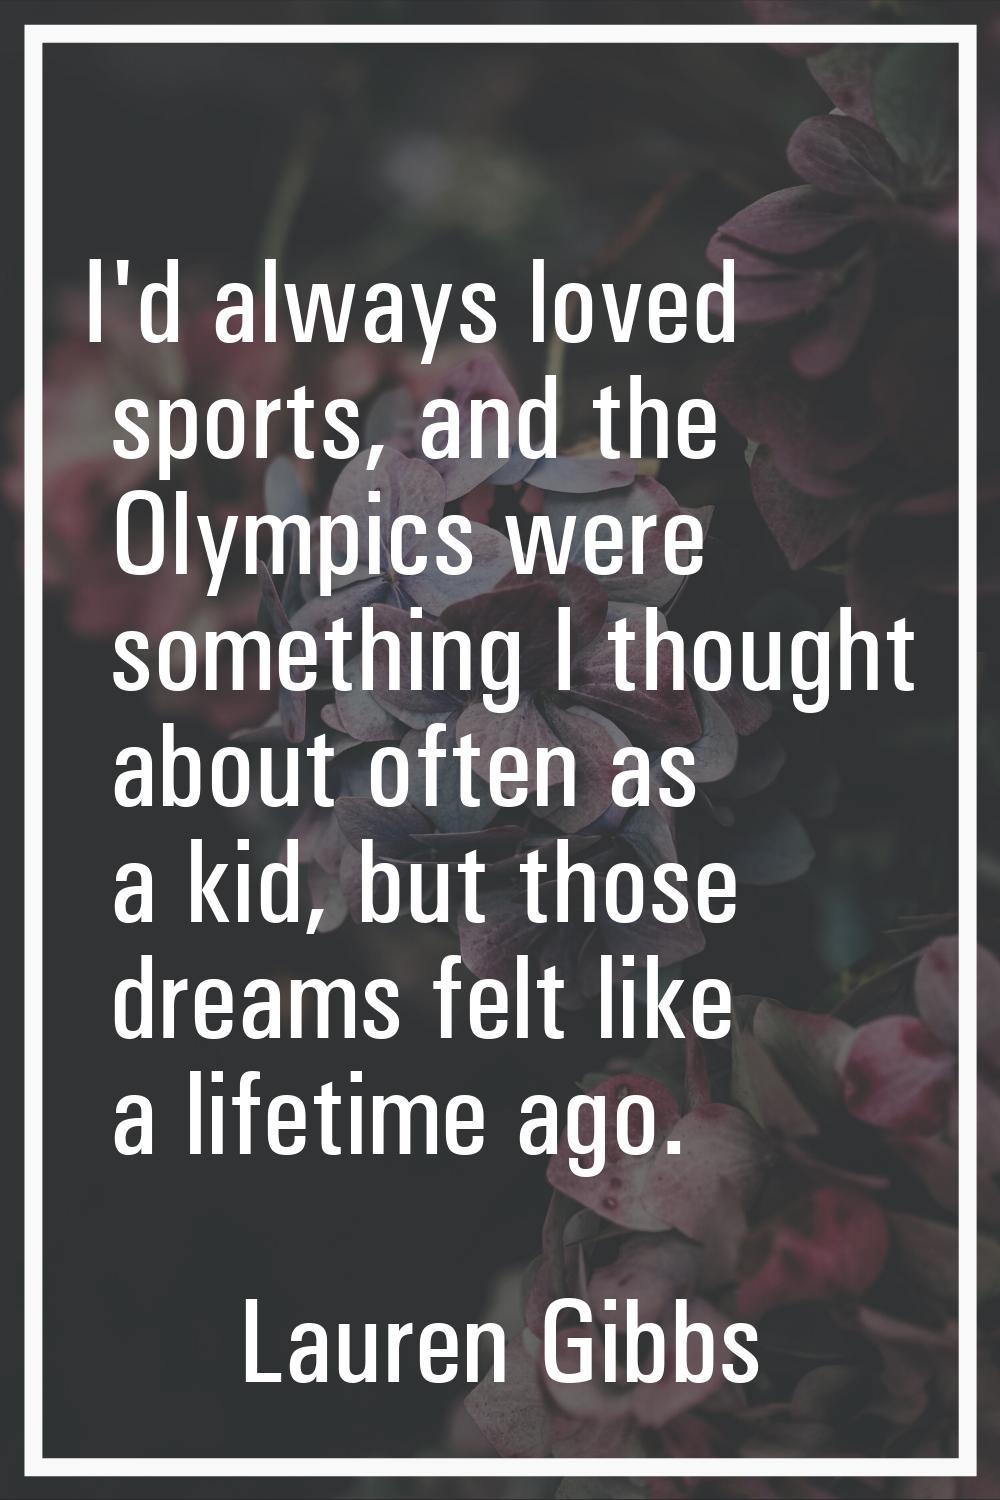 I'd always loved sports, and the Olympics were something I thought about often as a kid, but those 